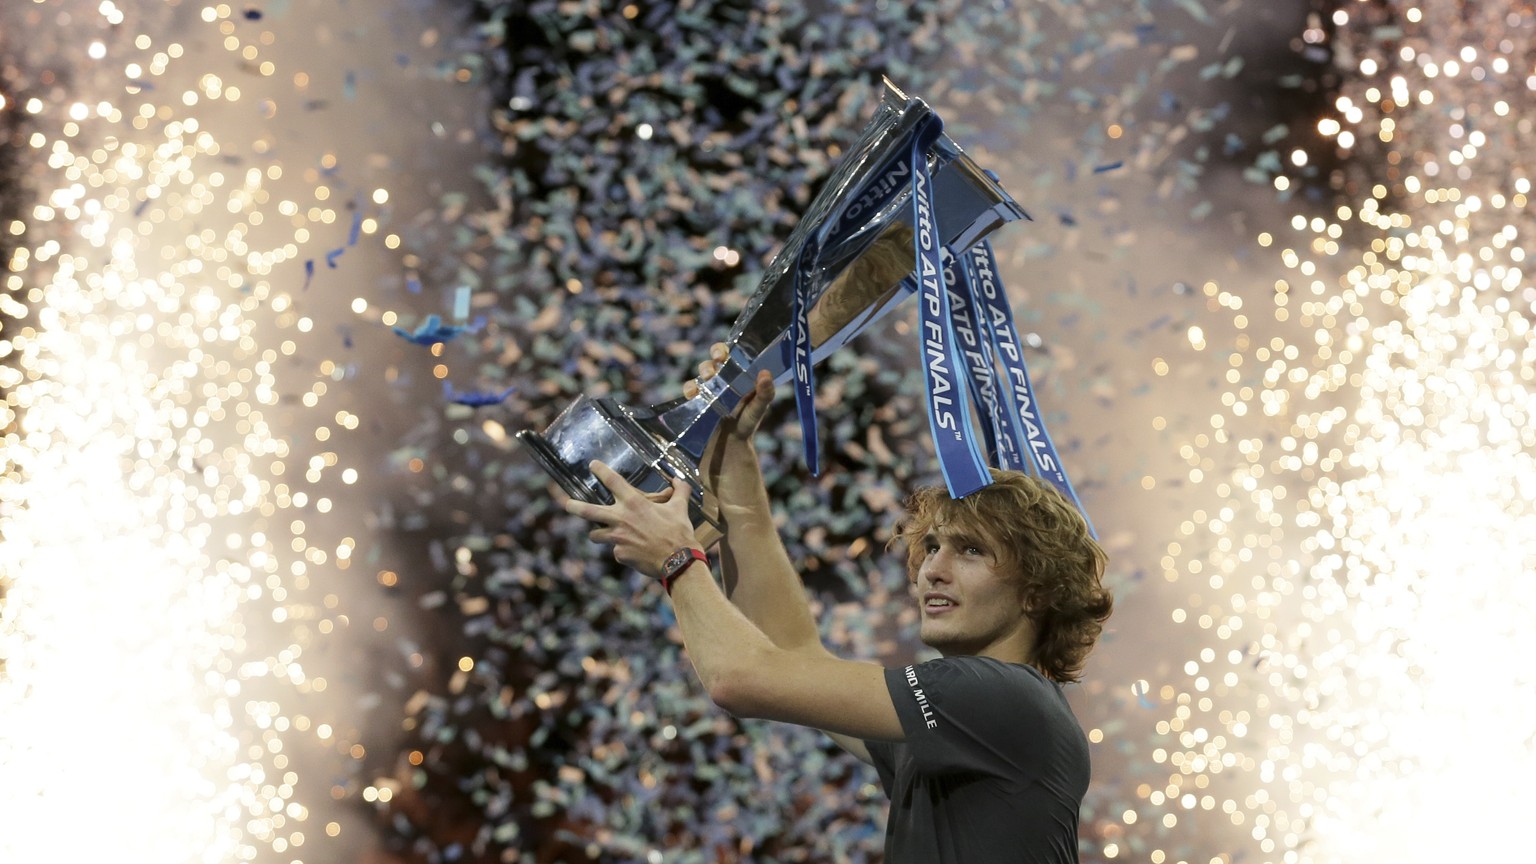 FILE - In this Sunday Nov. 18, 2018 file photo, Alexander Zverev of Germany holds up the trophy after defeating Novak Djokovic of Serbia in their ATP World Tour Finals singles final tennis match at th ...